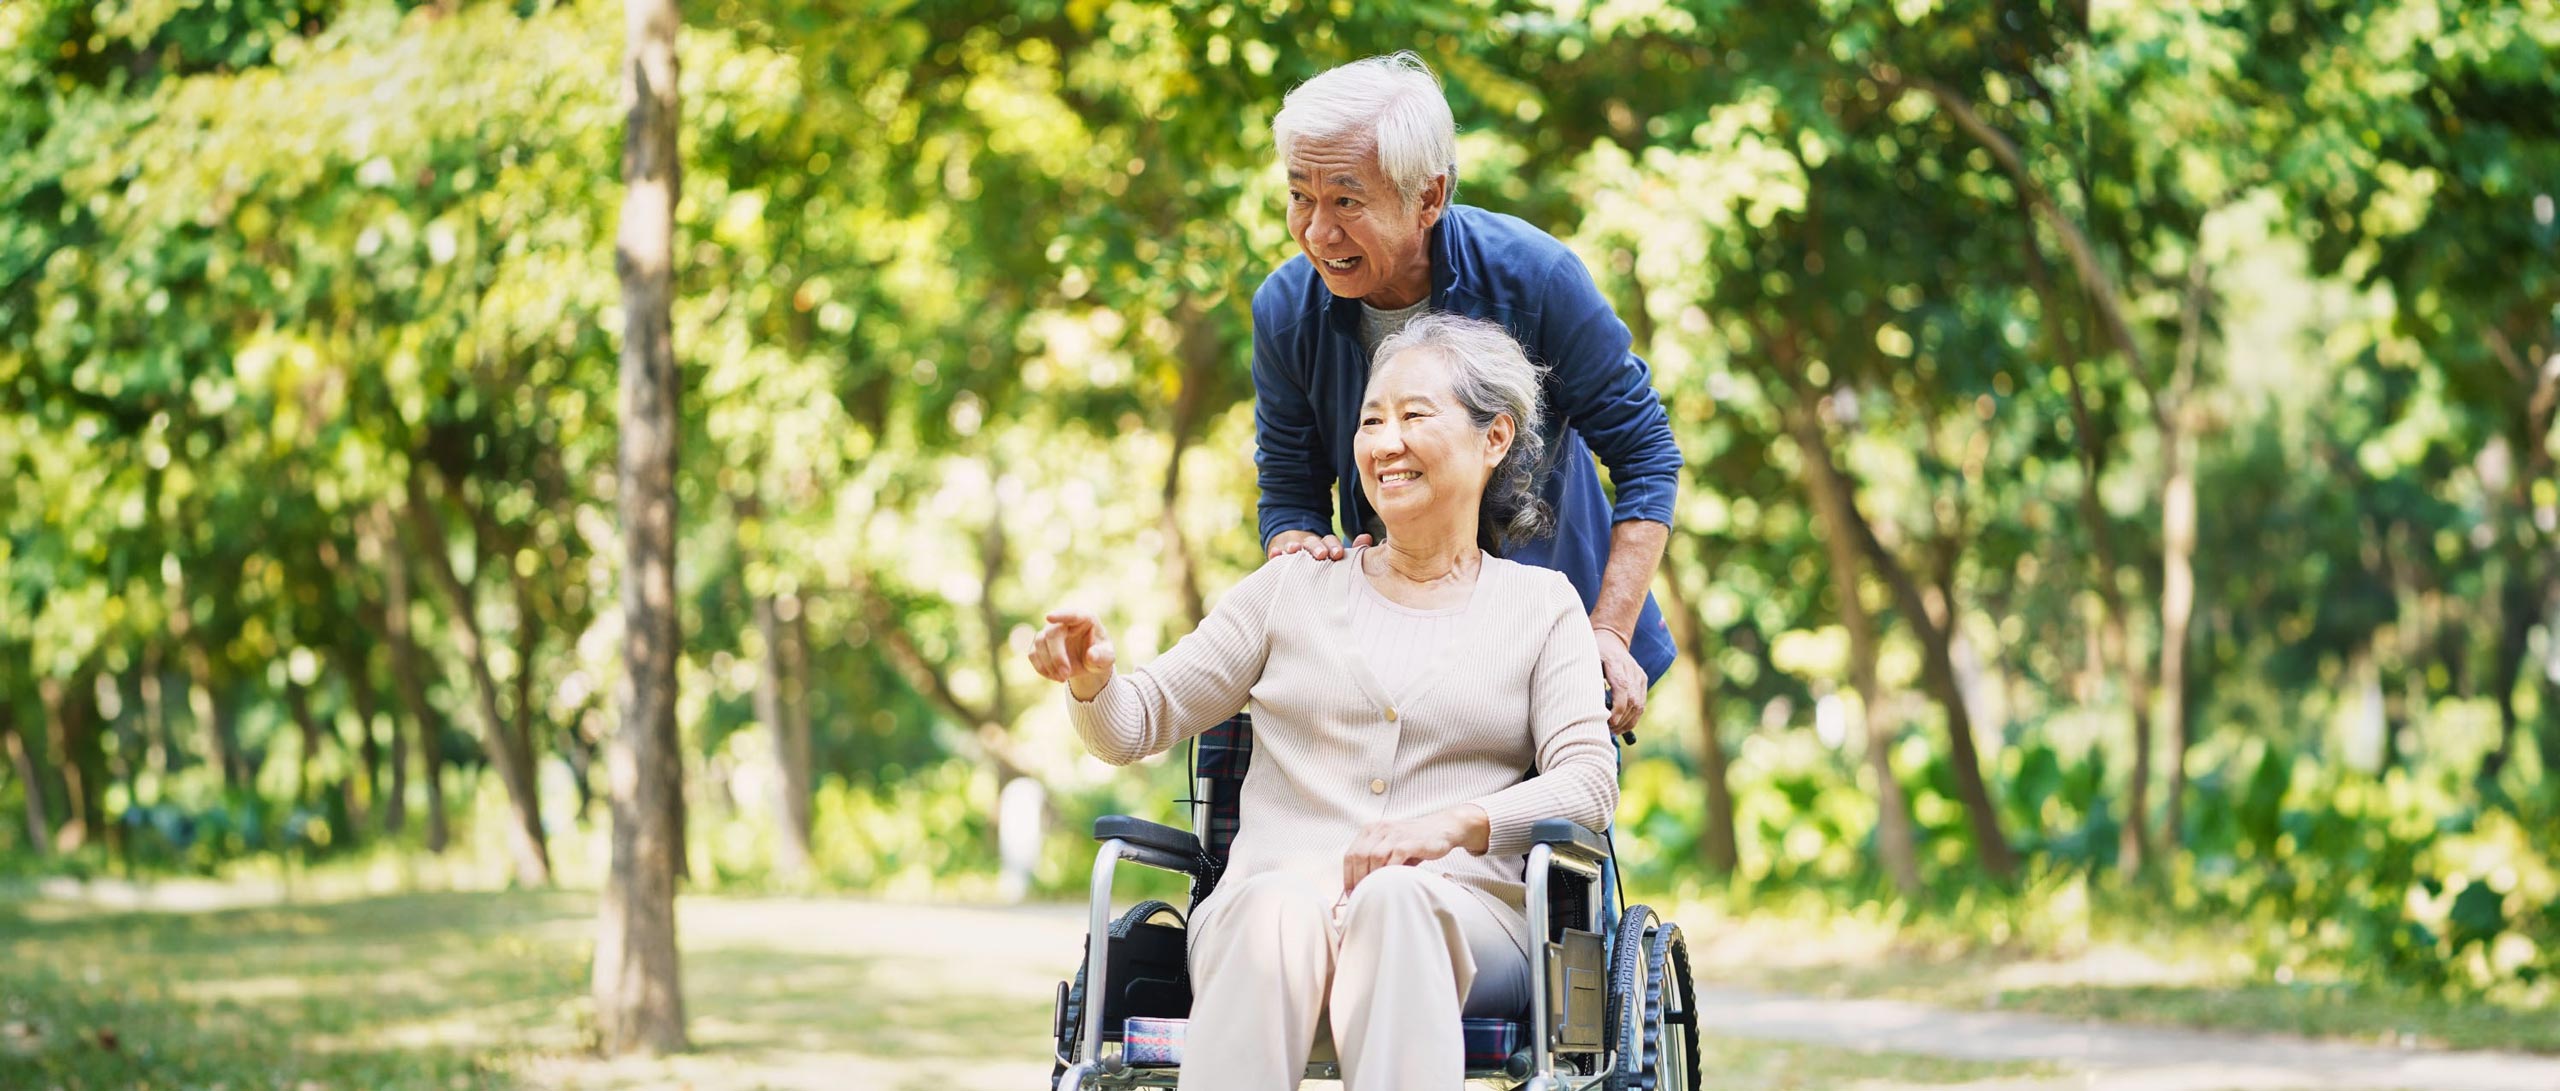 Older couple outdoors, man pushing woman in a wheelchair.